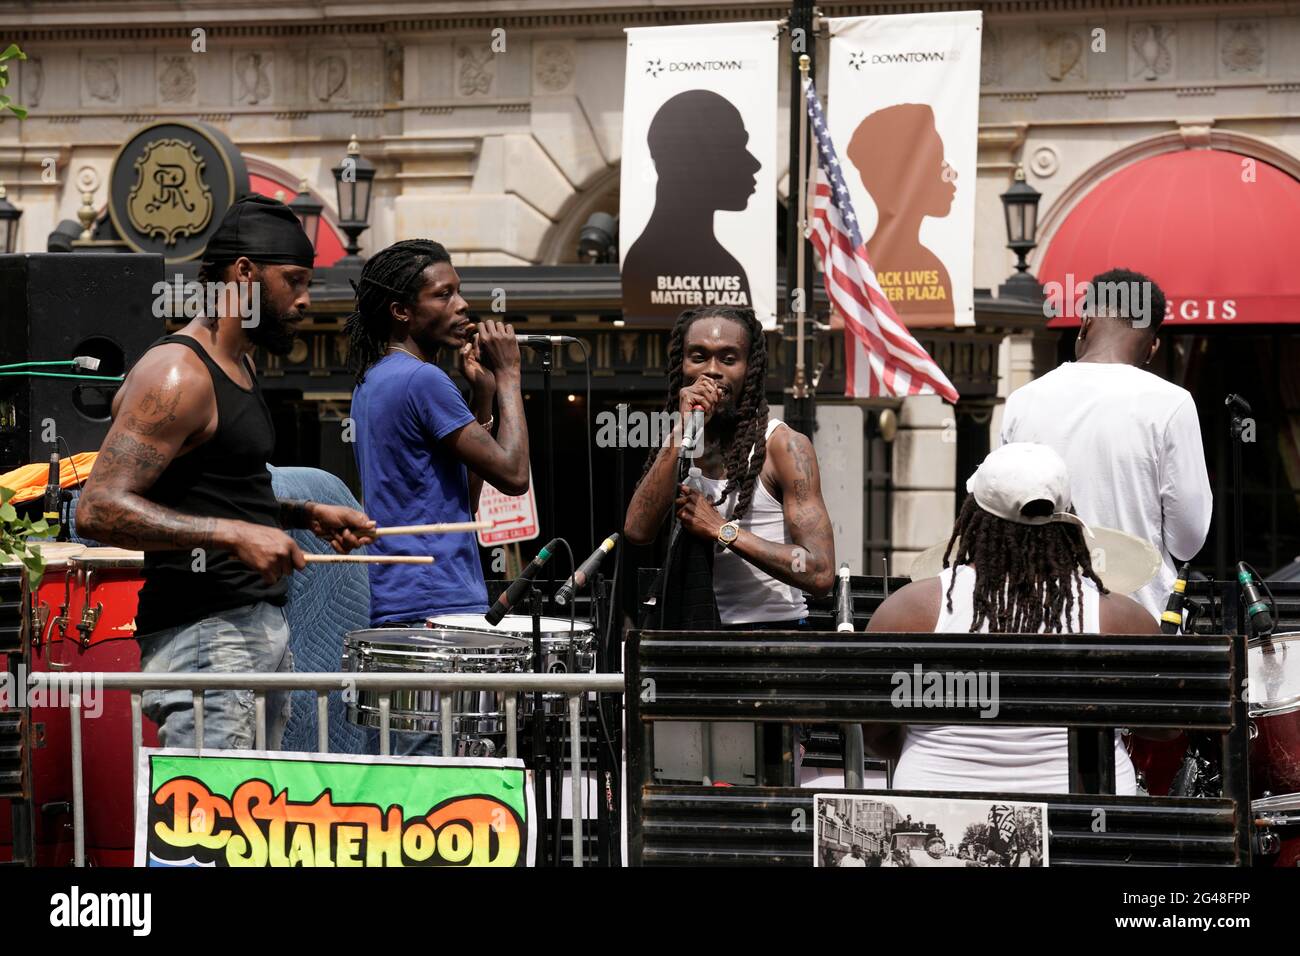 Band N2L performs as people celebrate Juneteenth, which commemorates the end of slavery in Texas, two years after the 1863 Emancipation Proclamation freed slaves elsewhere in the United States, at Black Lives Matter Plaza in Washington, D.C. U.S., June 19, 2021. REUTERS/Ken Cedeno Stock Photo